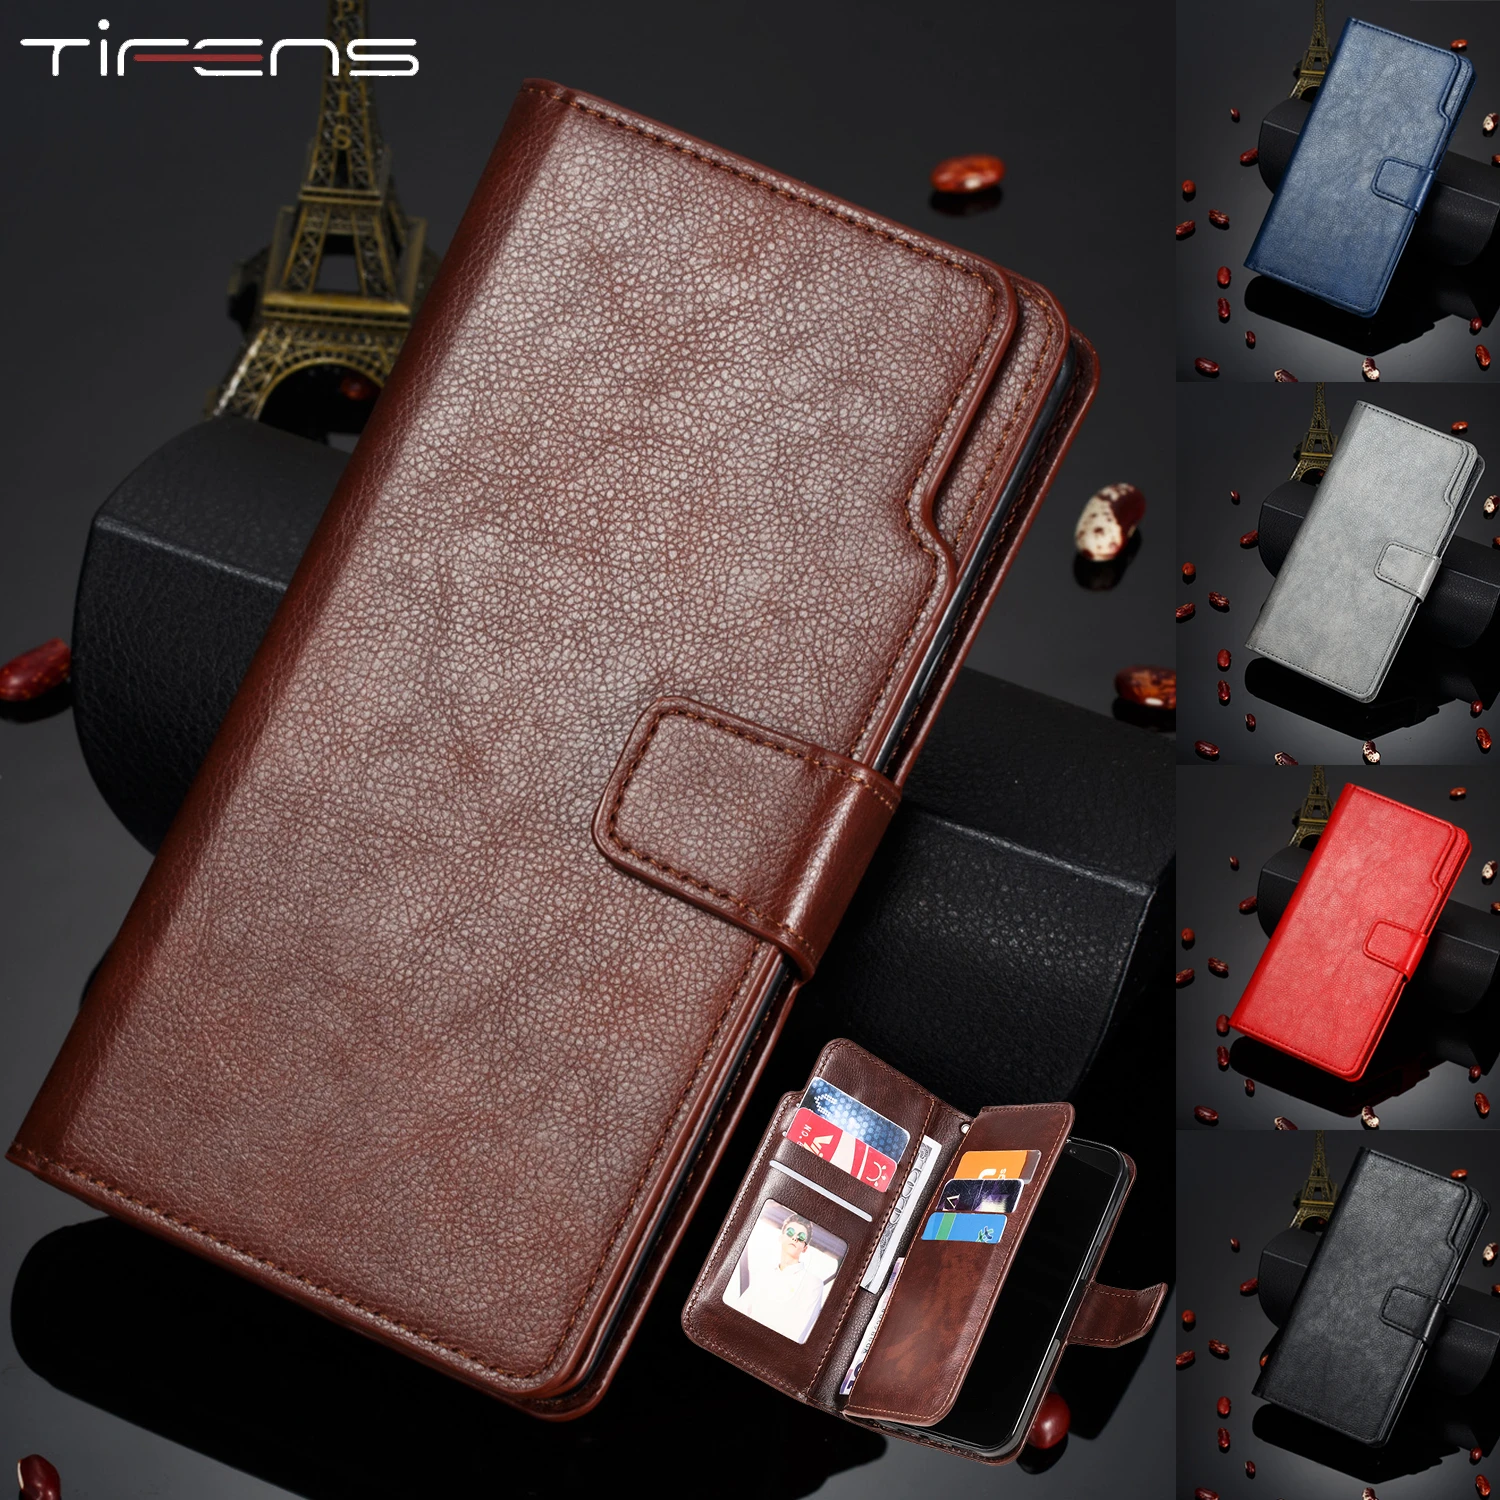 Luxury Leather Case For Samsung Galaxy S21 S20 FE S10 E S9 Note 10 20 Ultra Plus A81 A91 Flip Wallet Card Holder Magnetic Cover